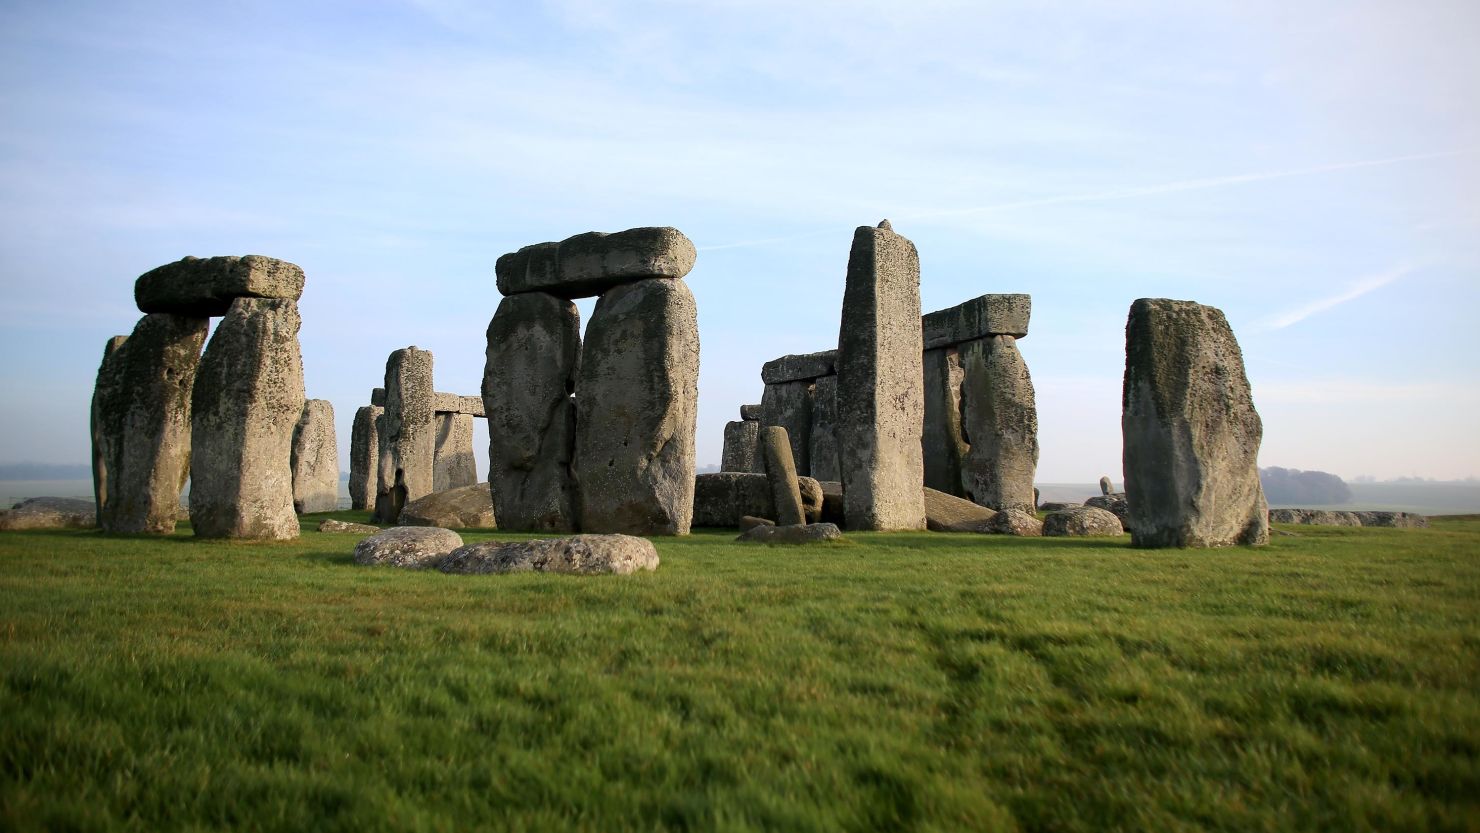 Archaeologists are concerned road developers are threatening prehistoric artifacts near Stonehenge.